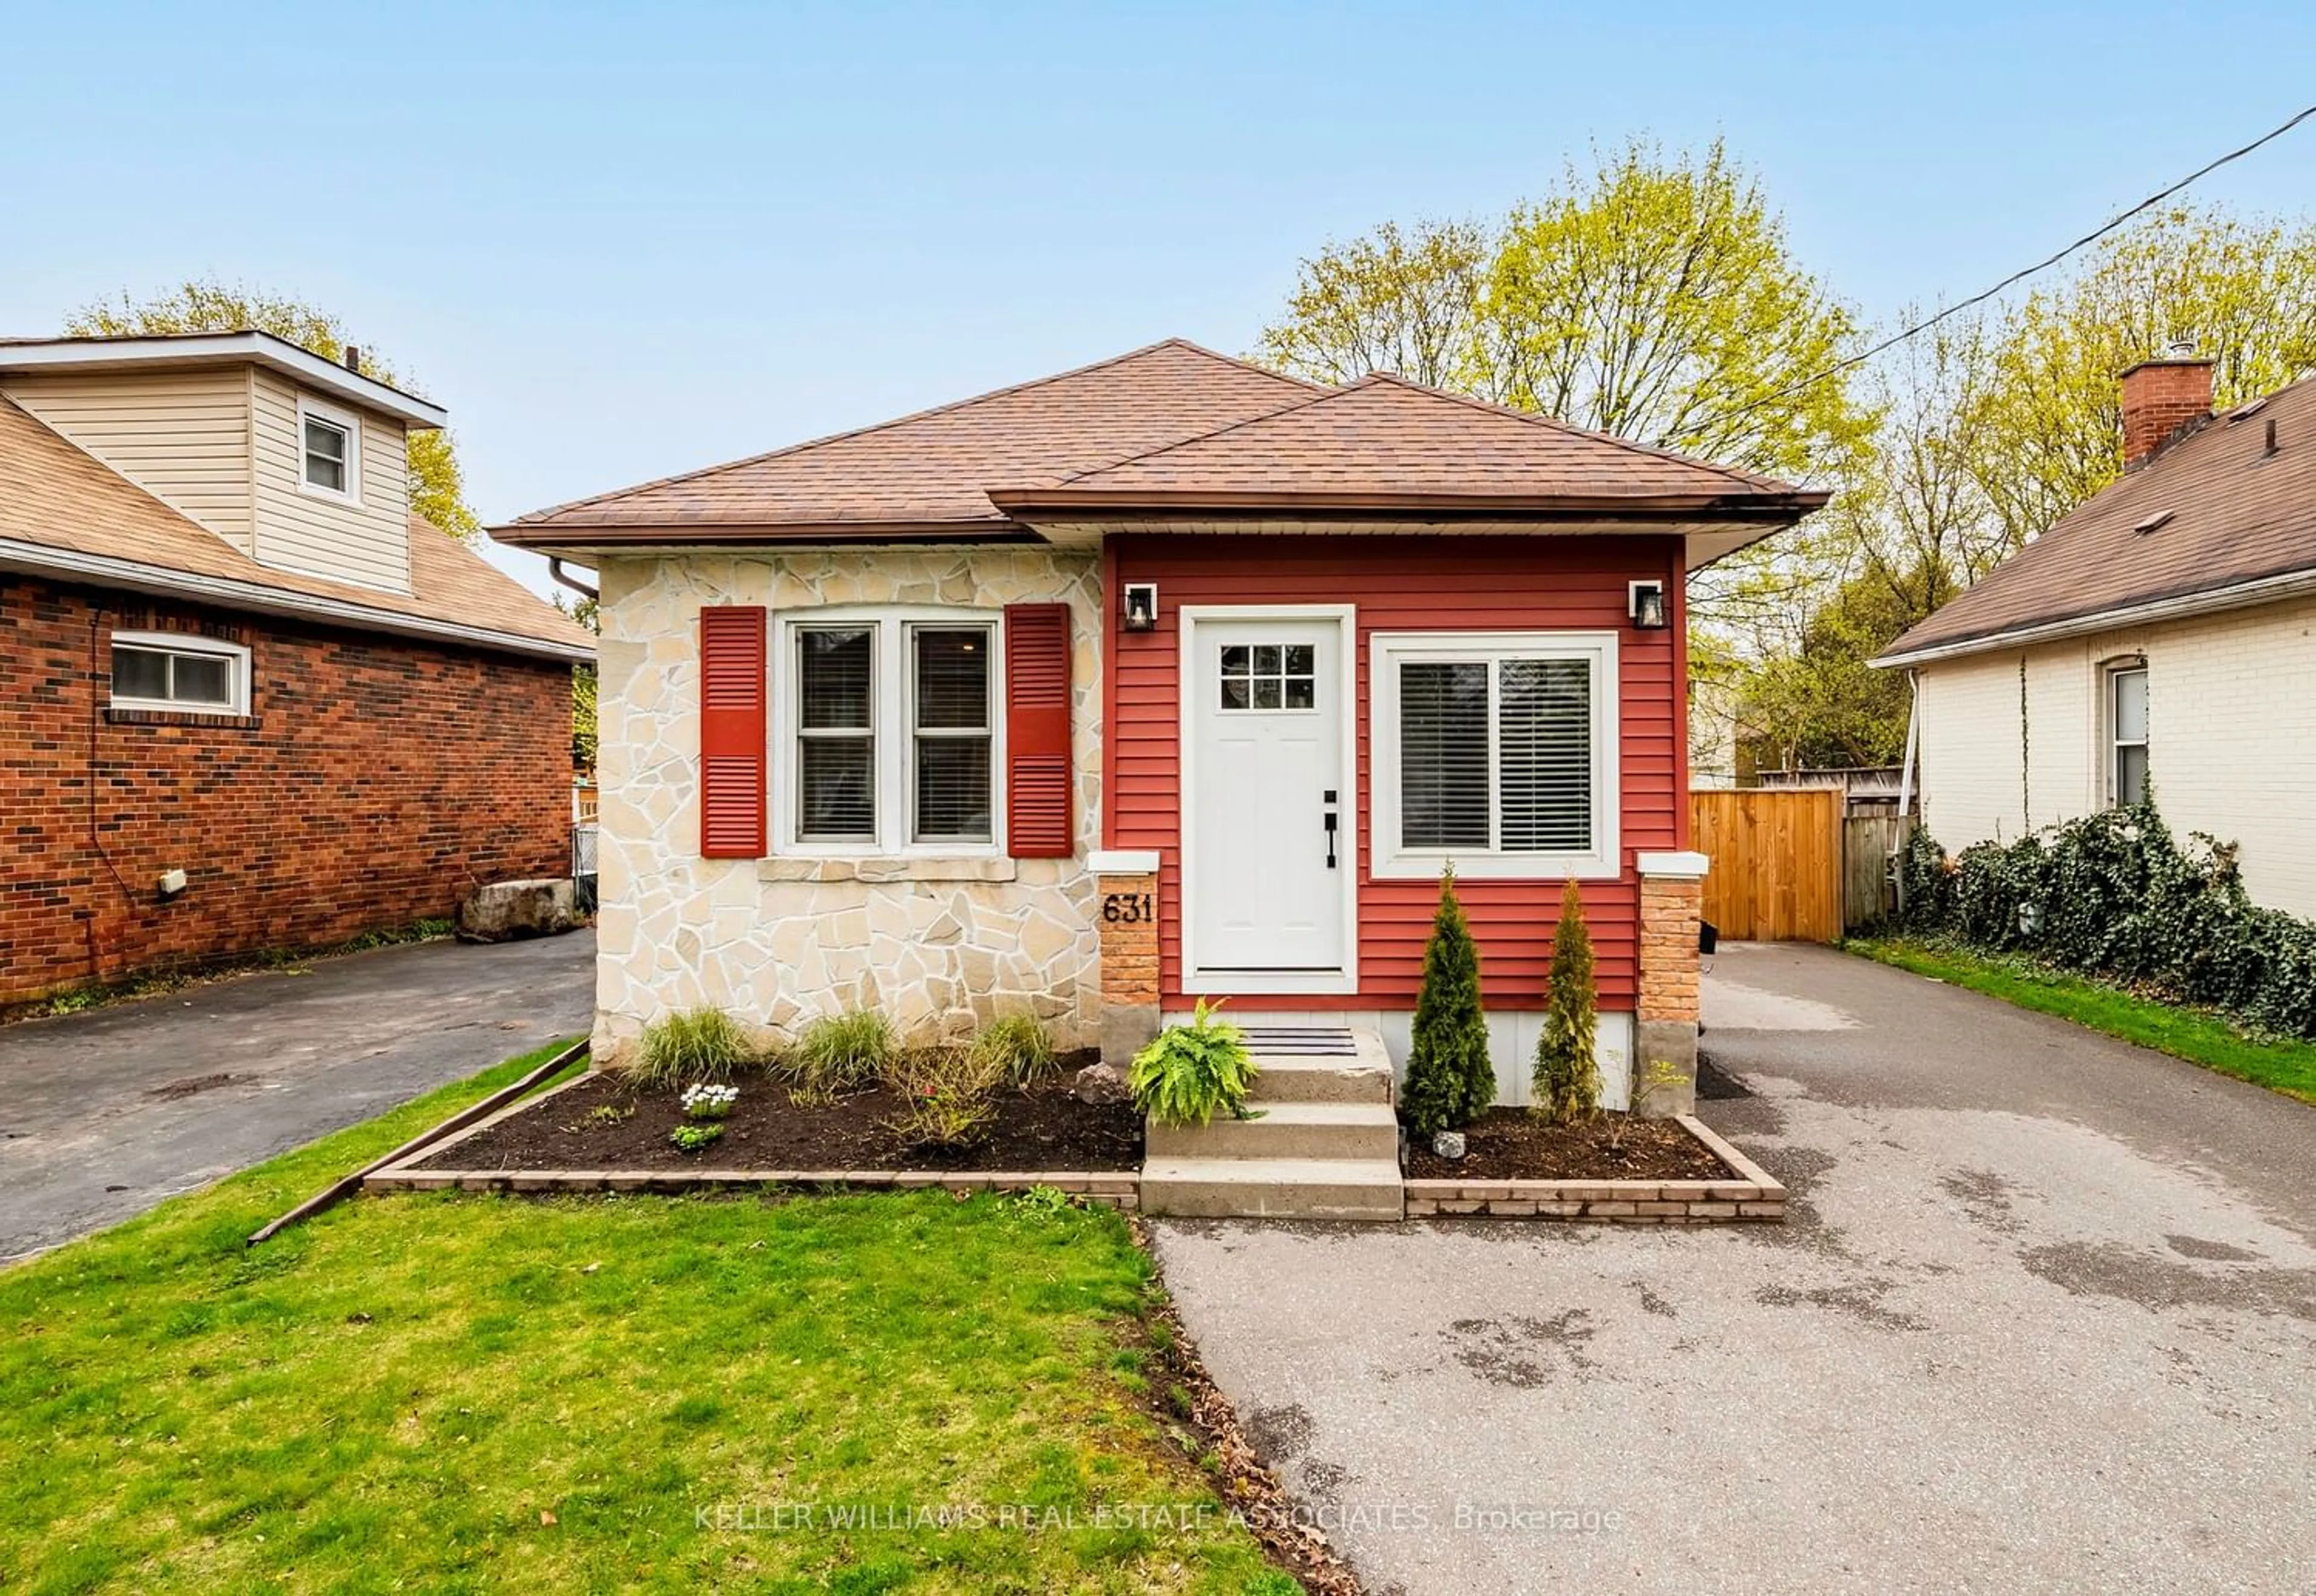 Home with brick exterior material for 631 Somerville Ave, Oshawa Ontario L1G 4J2